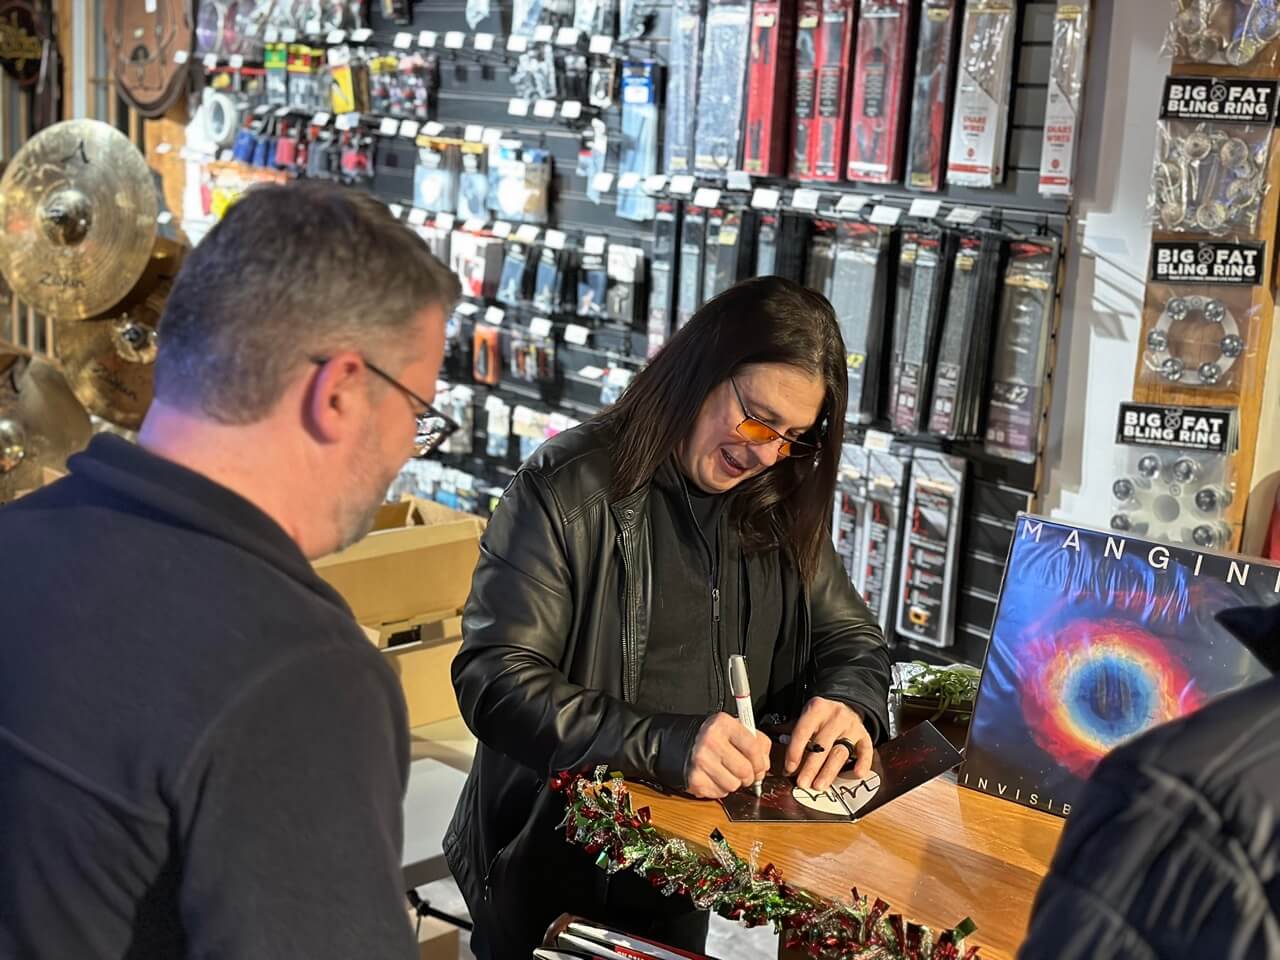 Mike Mangini Invisible Signs Release Party at Drum Center of Portsmouth